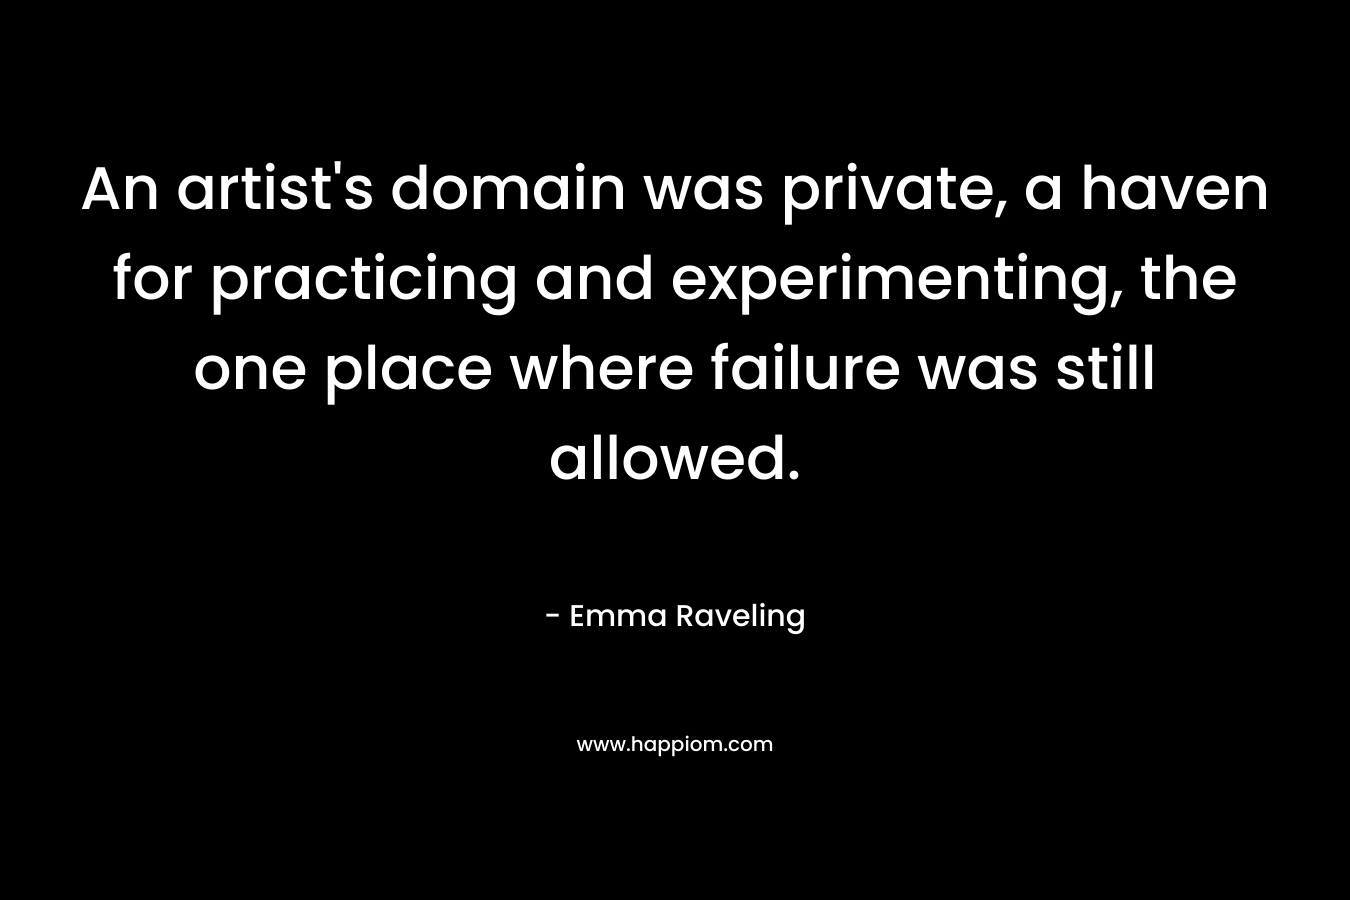 An artist’s domain was private, a haven for practicing and experimenting, the one place where failure was still allowed. – Emma Raveling